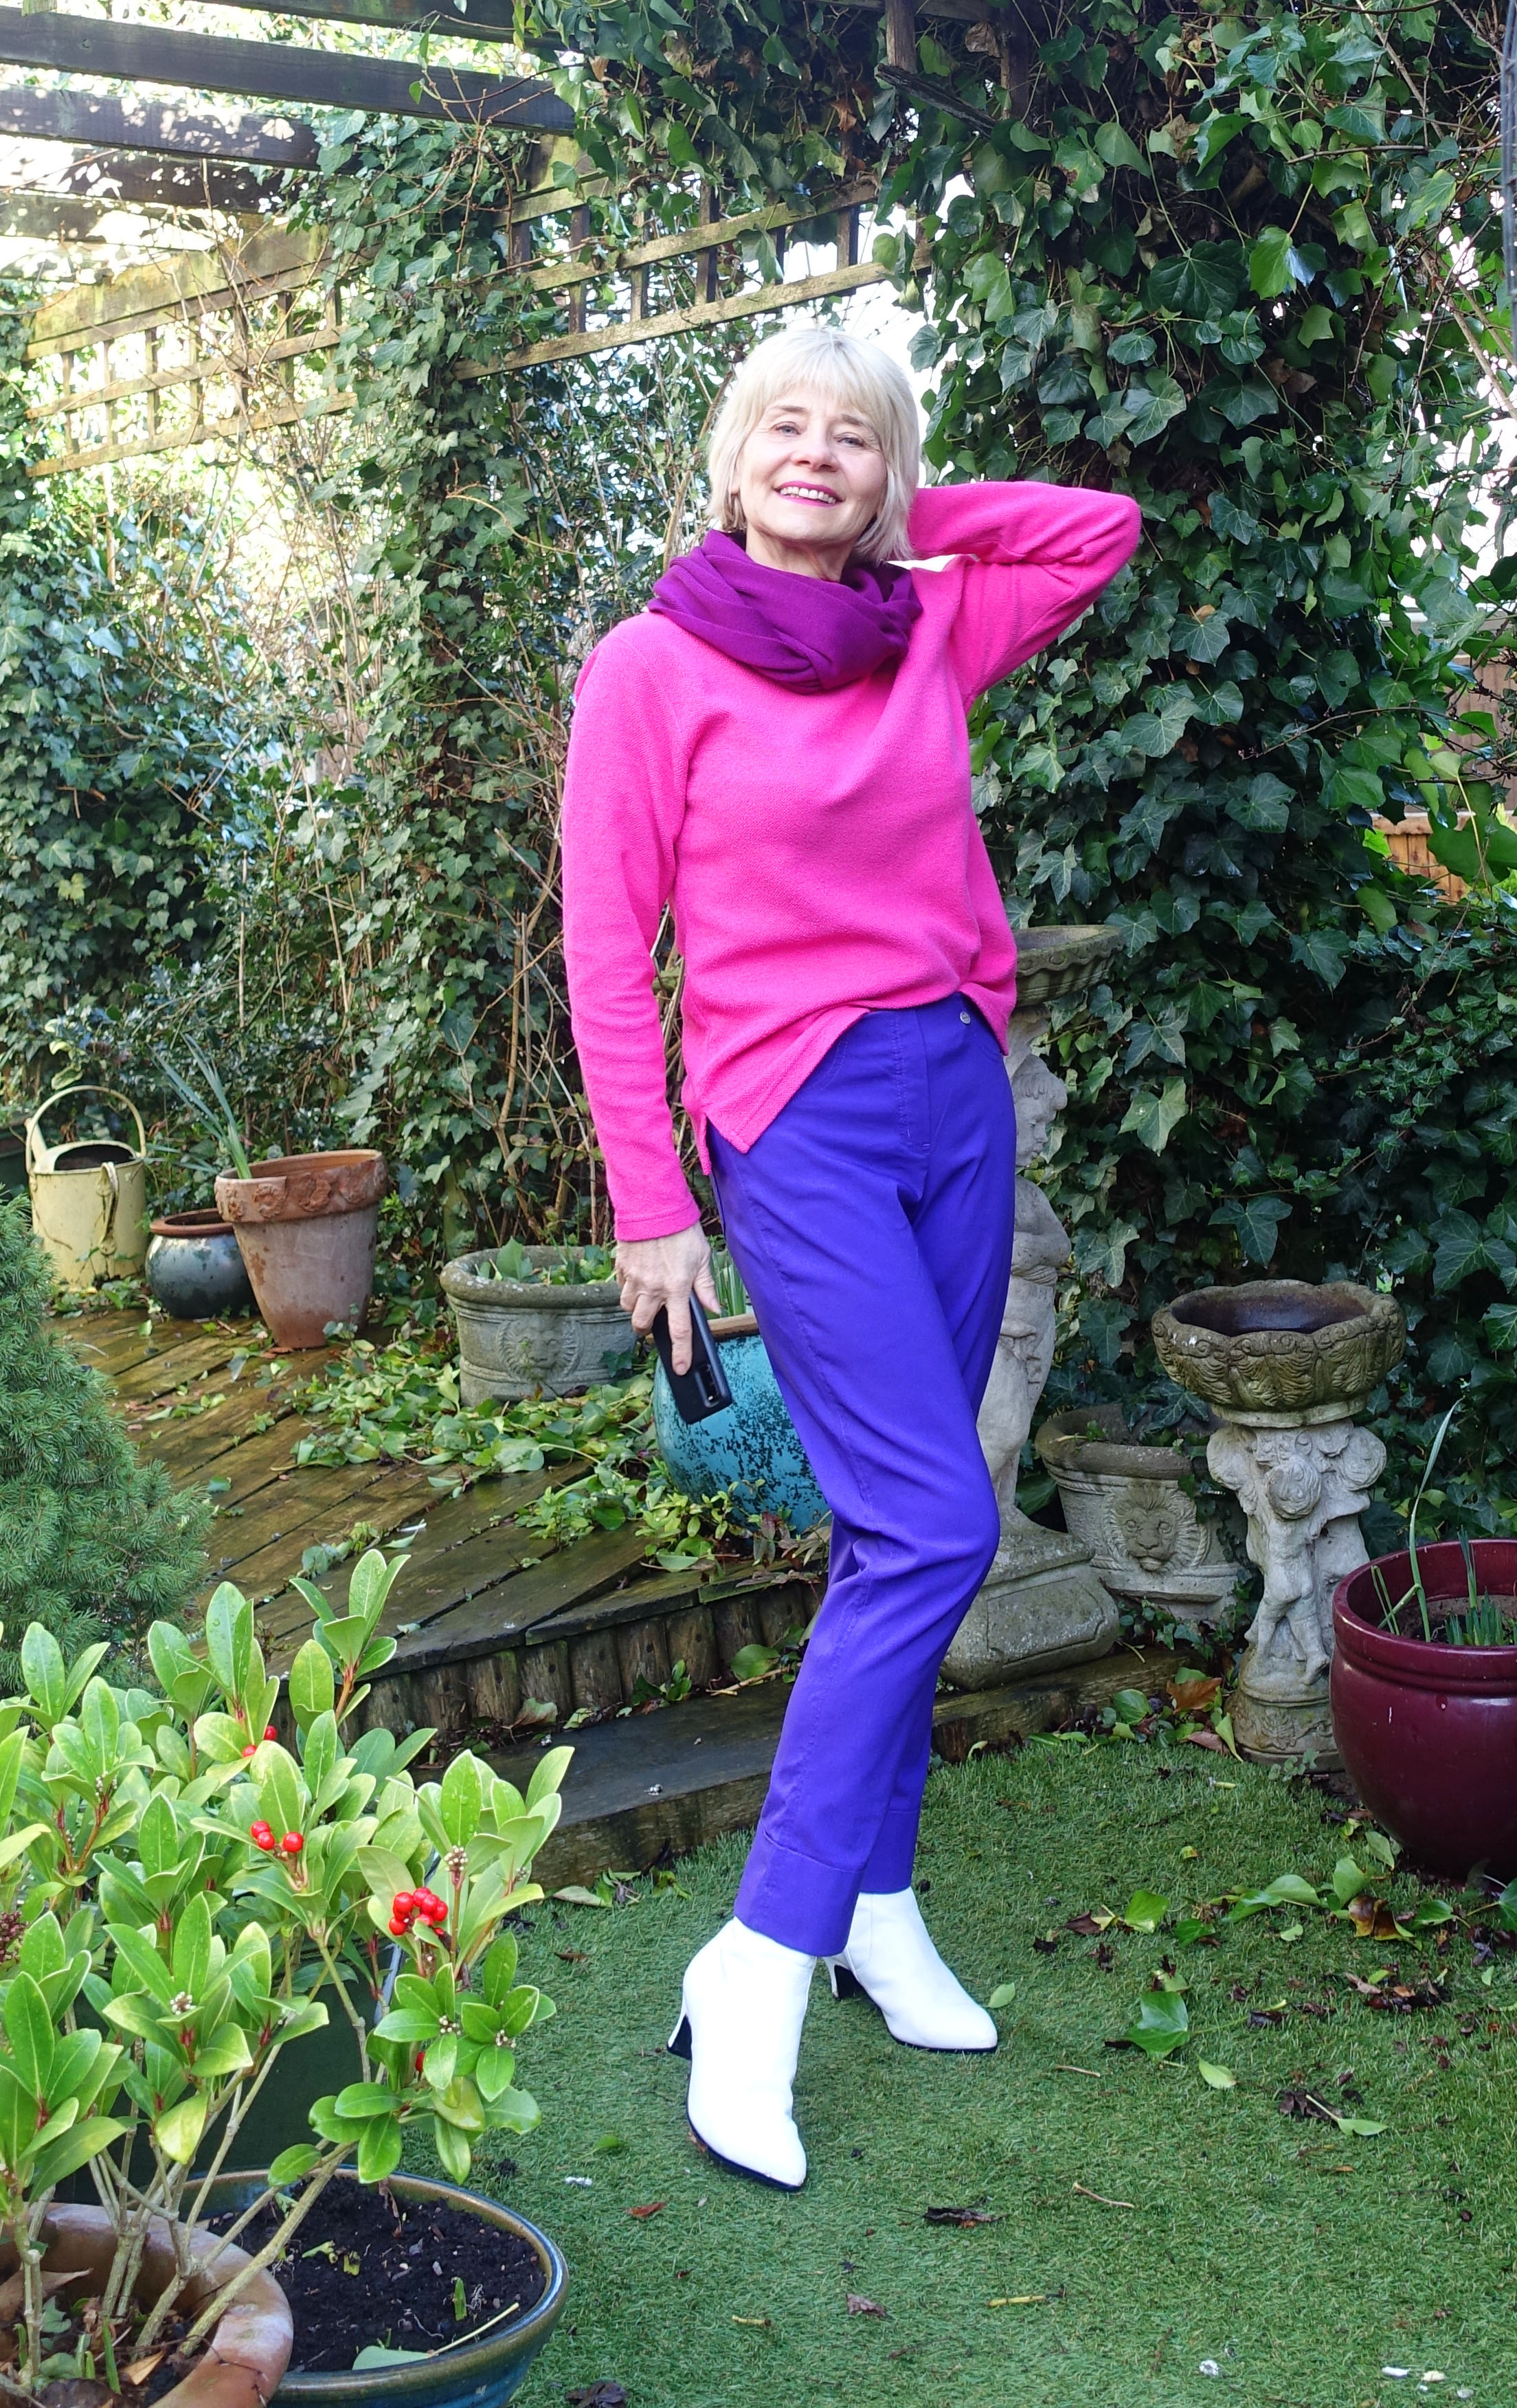 Gail Hanlon from Is This Mutton in bright pink and purple